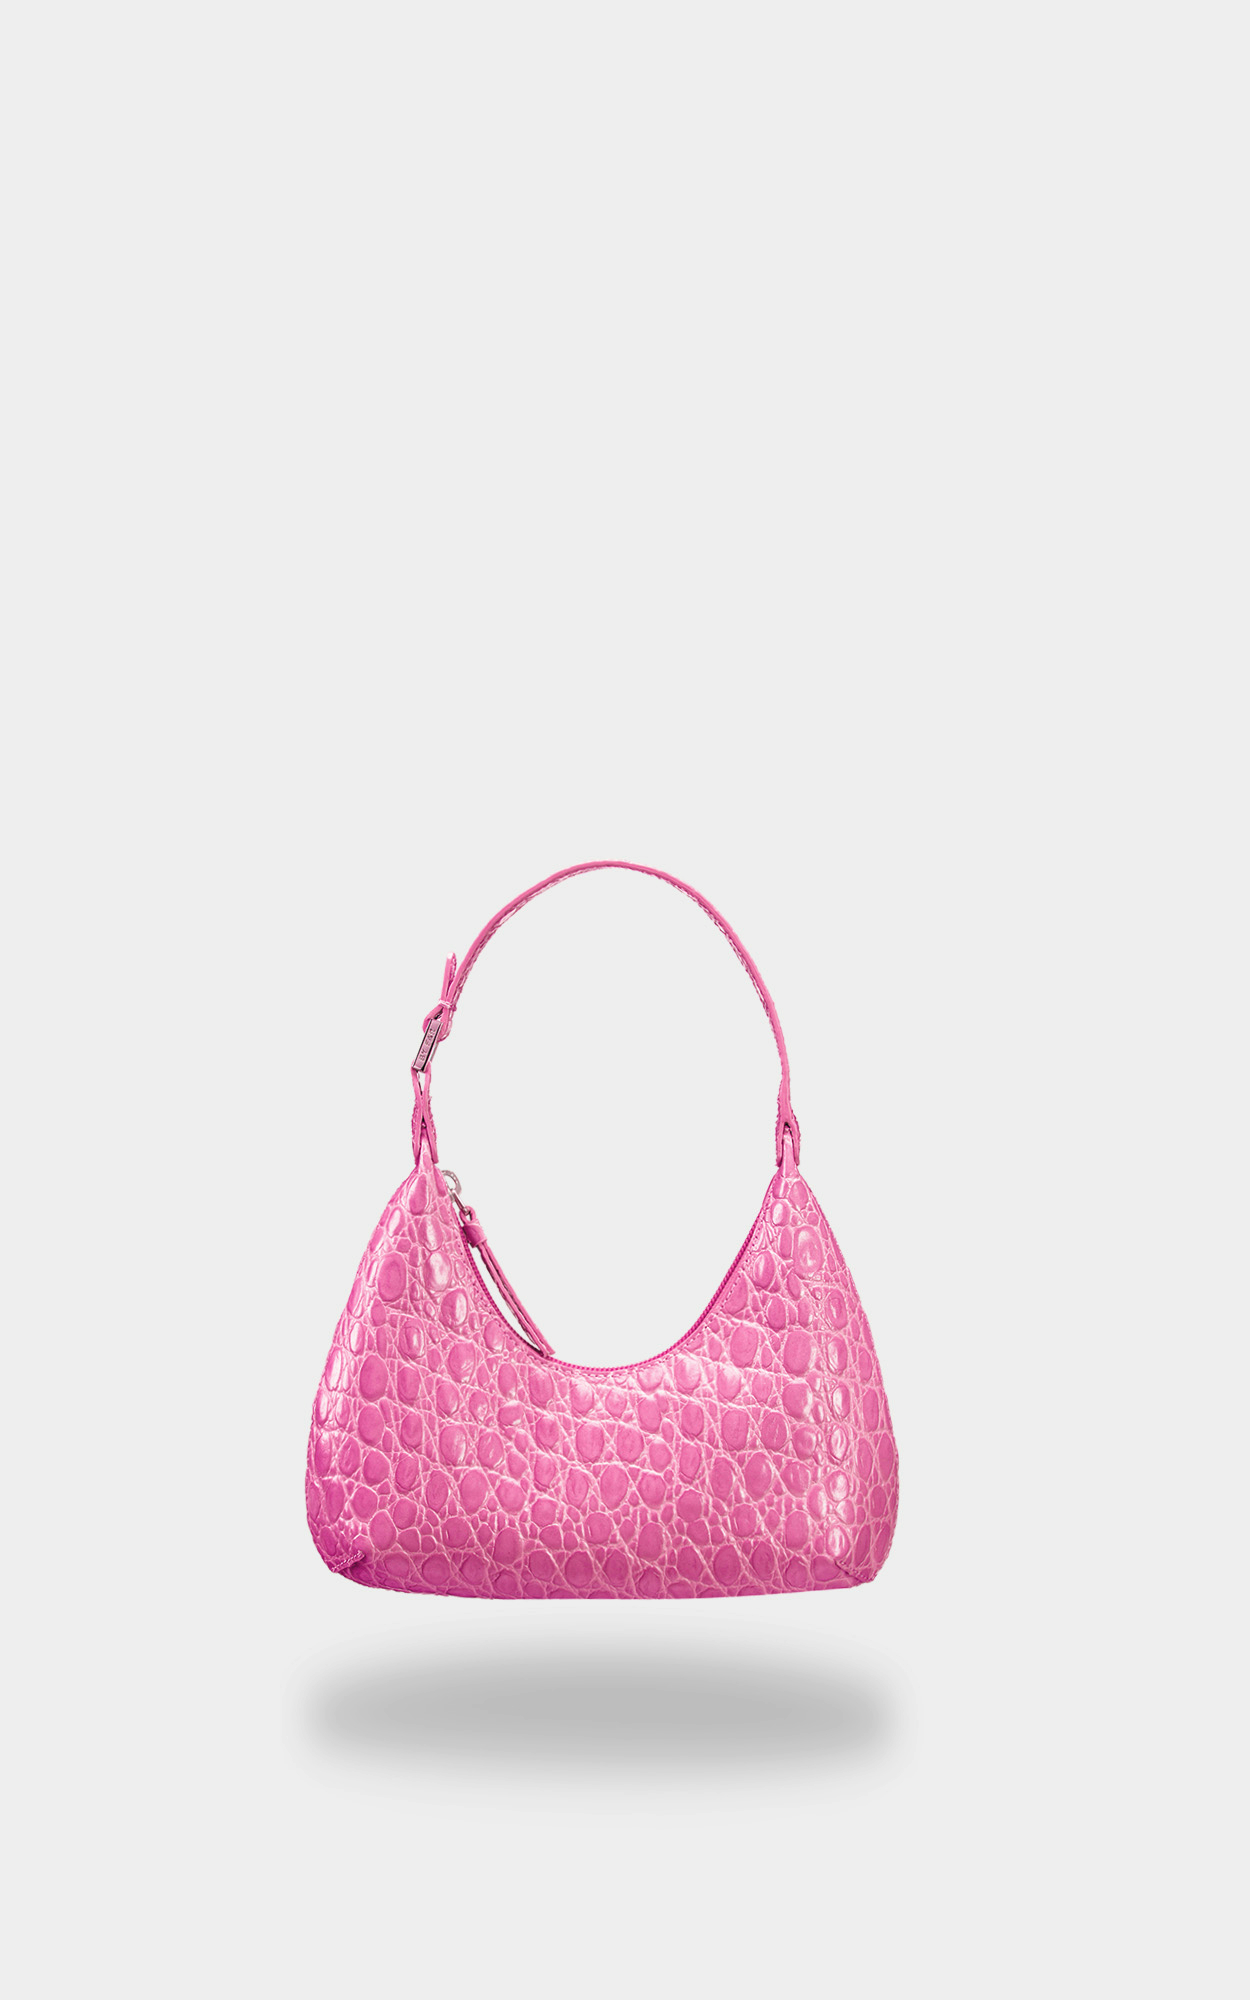 By FAR - Mini Amber Tote Bag in Pink